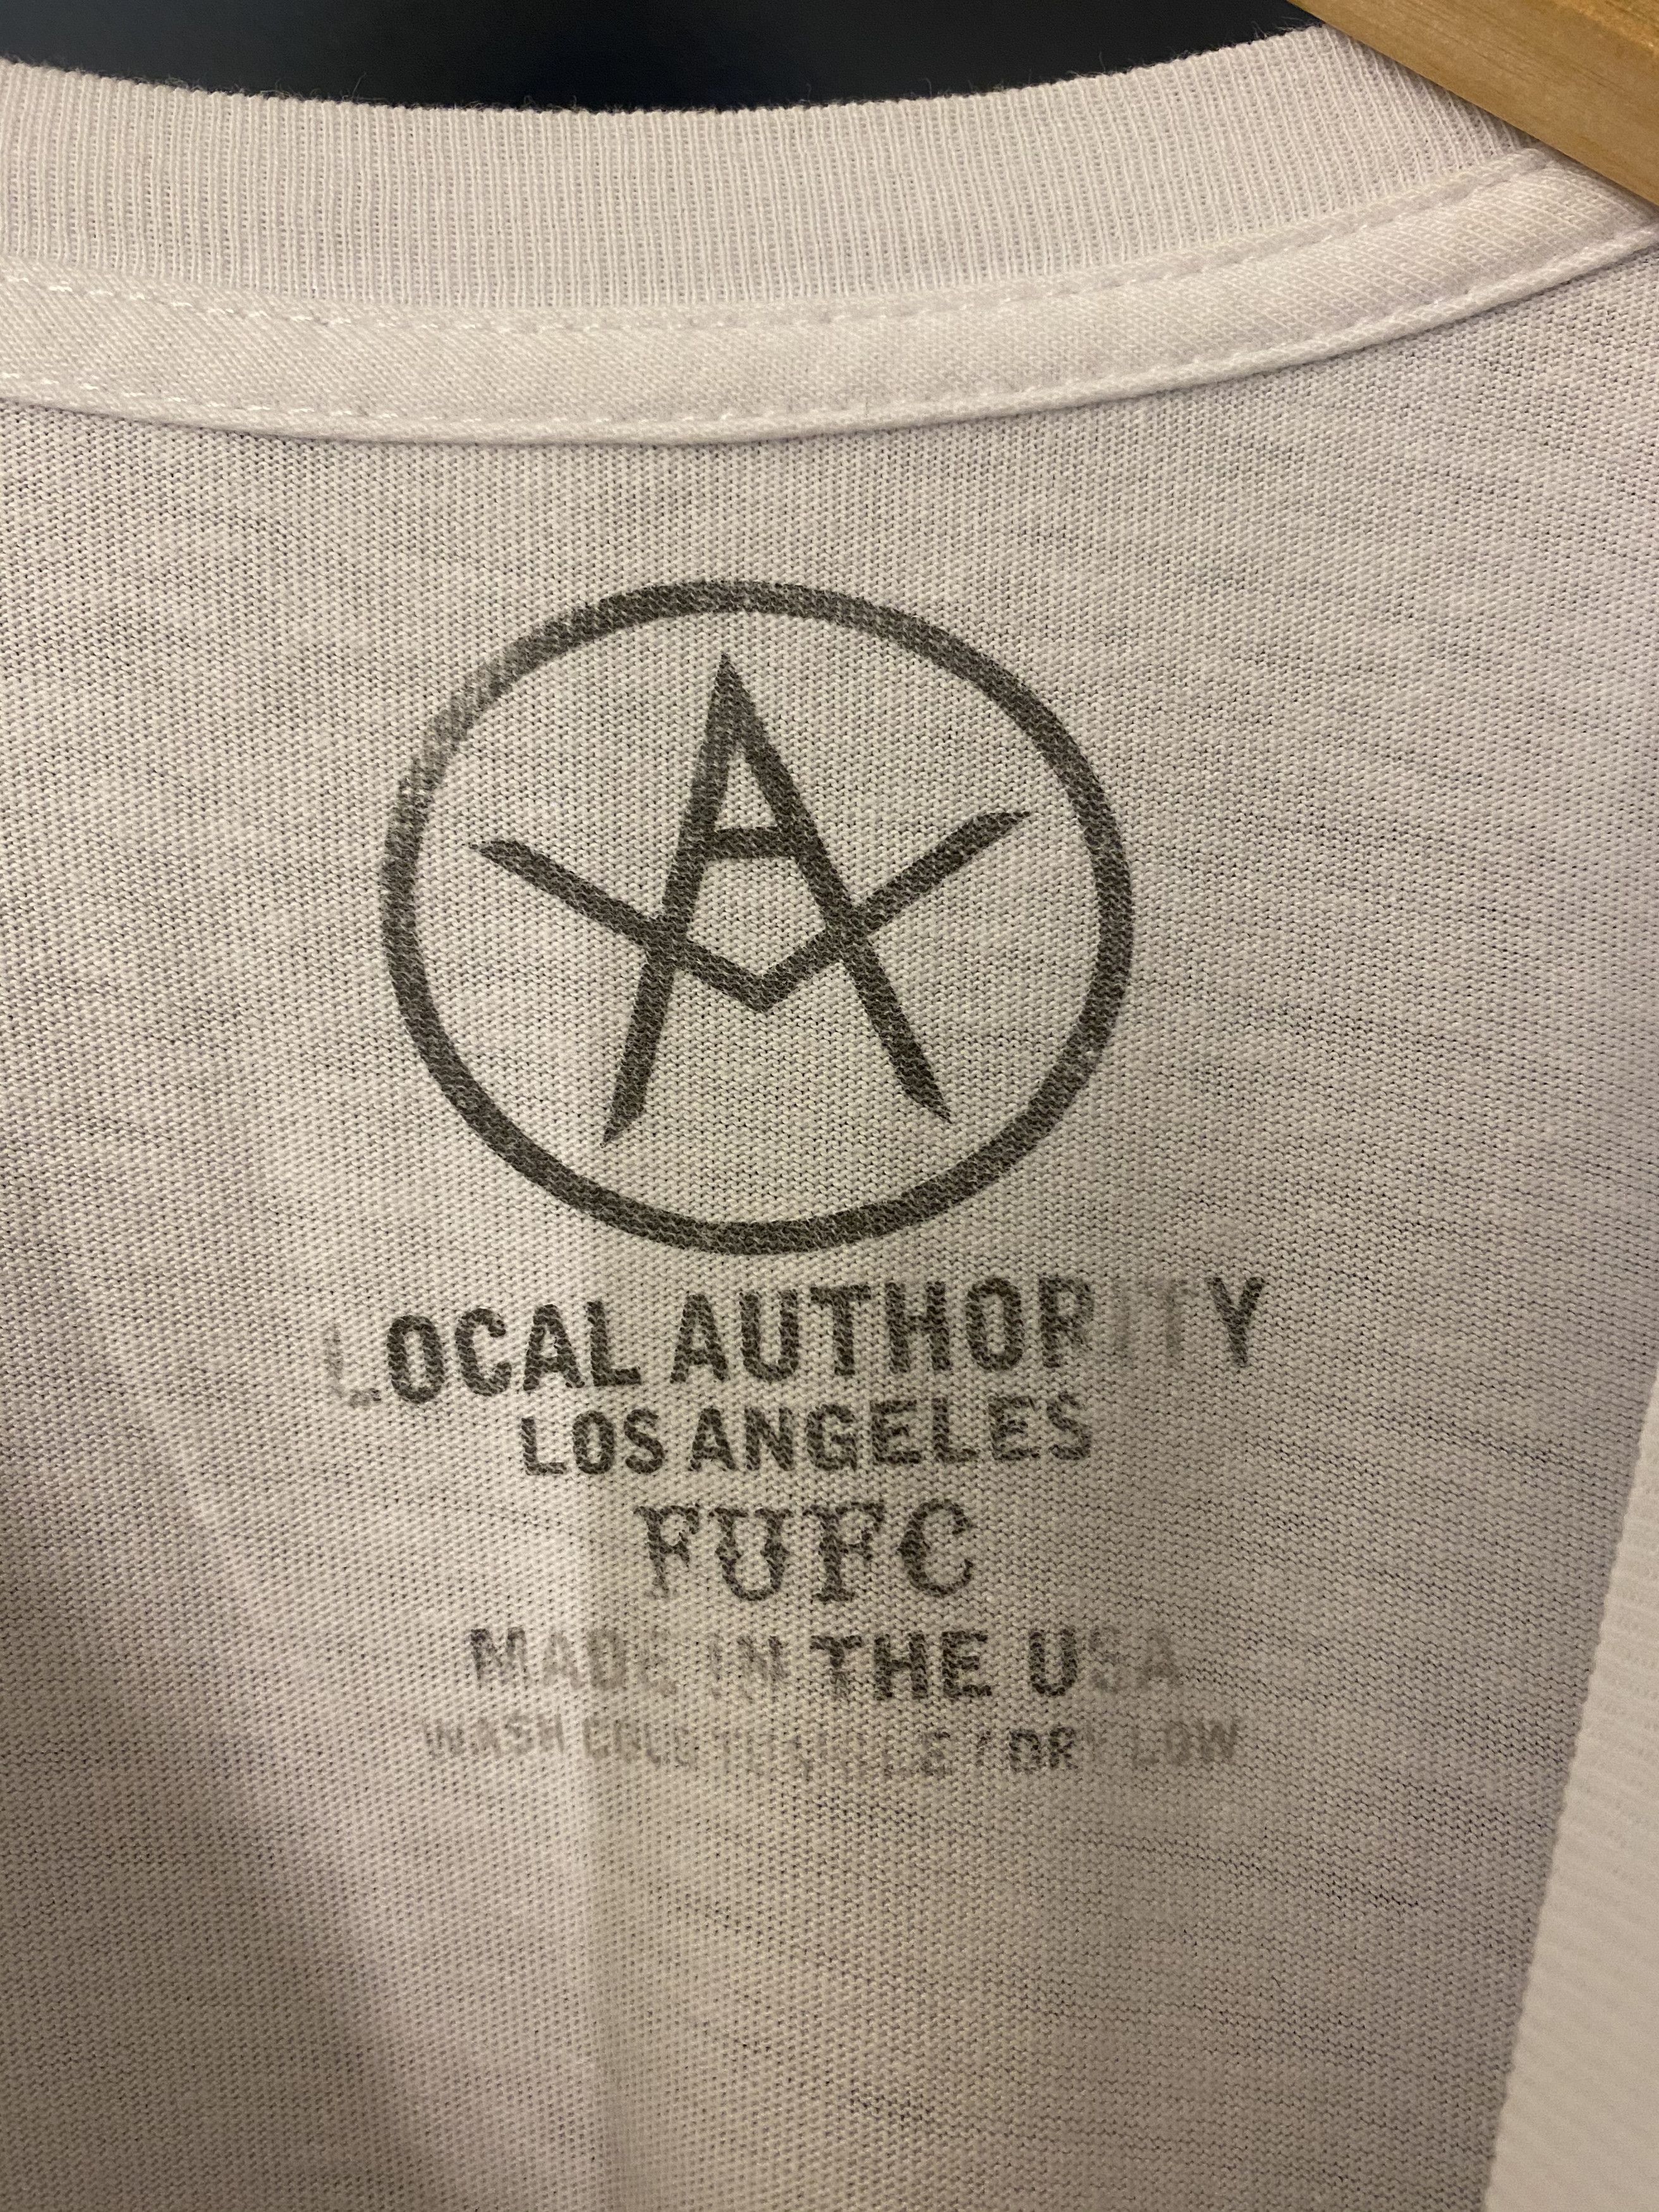 Local Authority Local Authority Beverly Hills 'FUFC' Tee Size US S / EU 44-46 / 1 - 3 Thumbnail